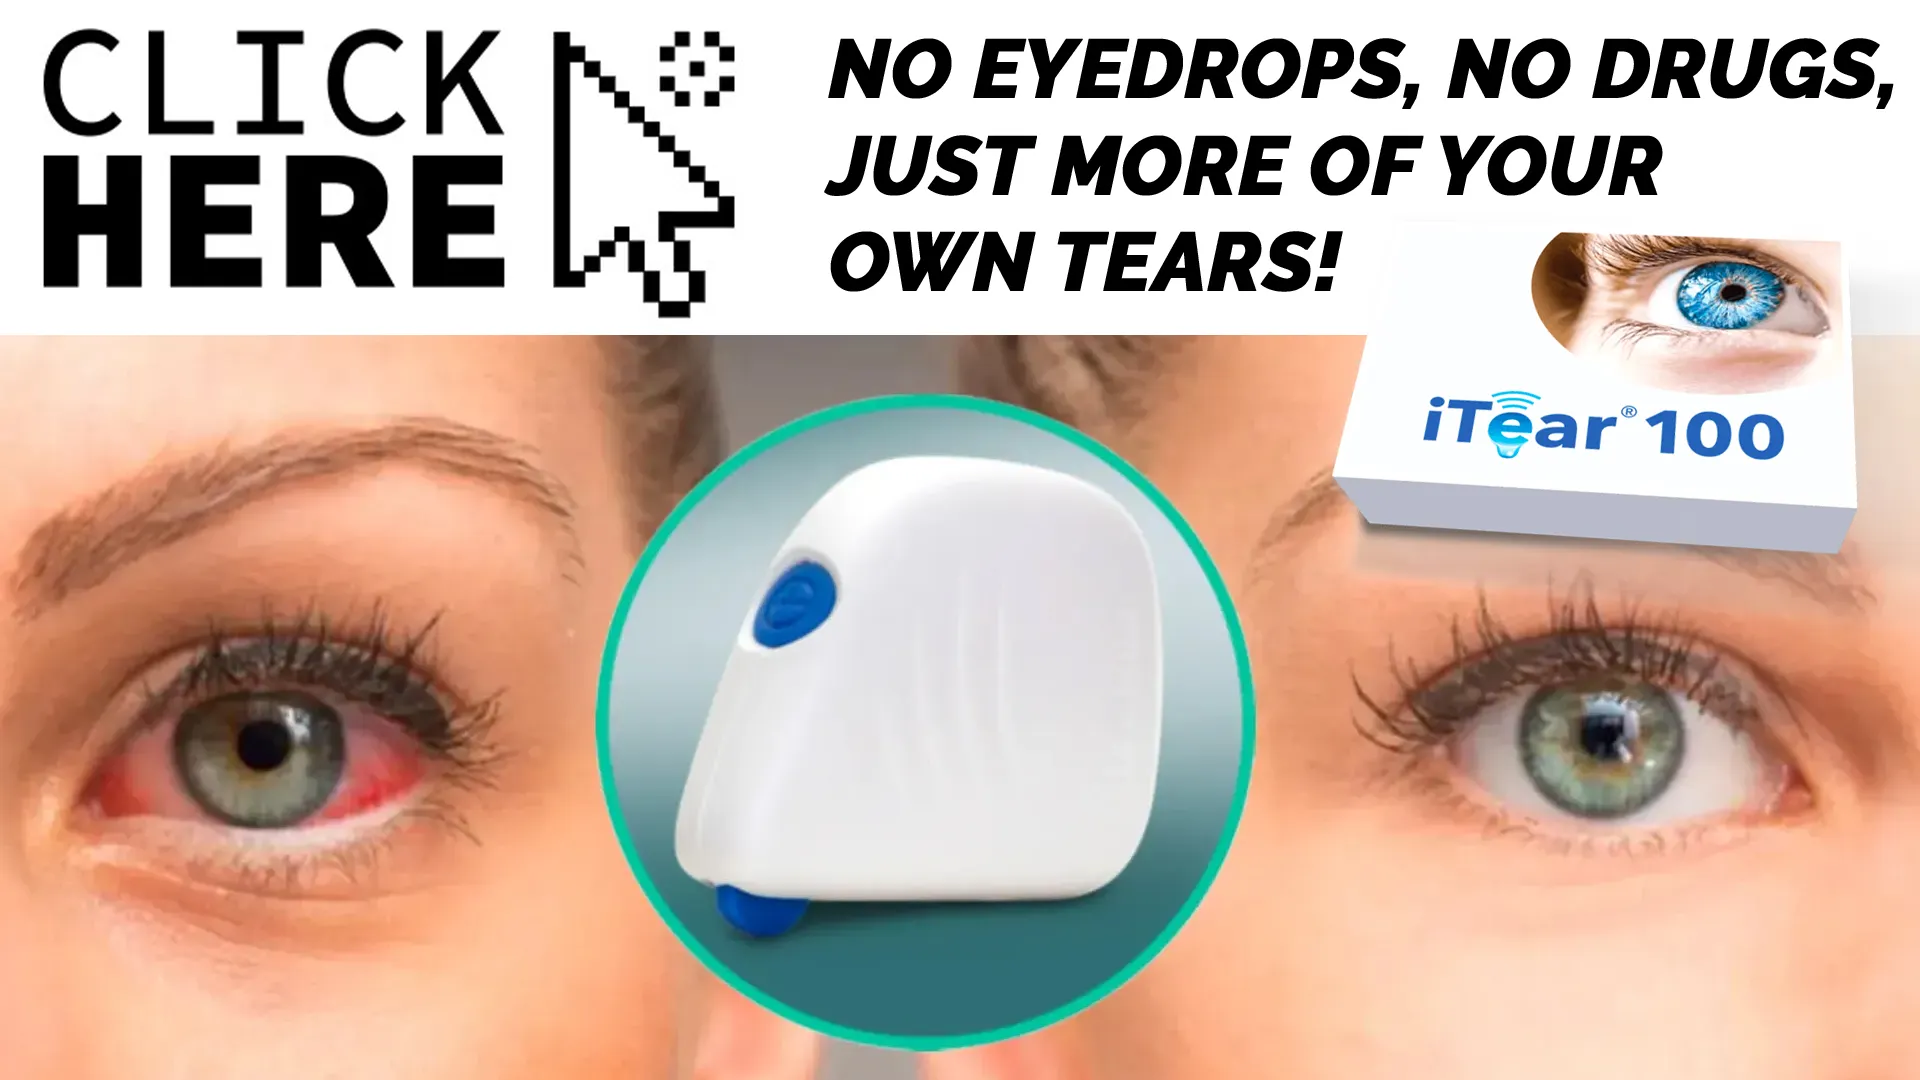 Treating Dry Eye Syndrome: Conventional Solutions and the iTEAR100 Revolution